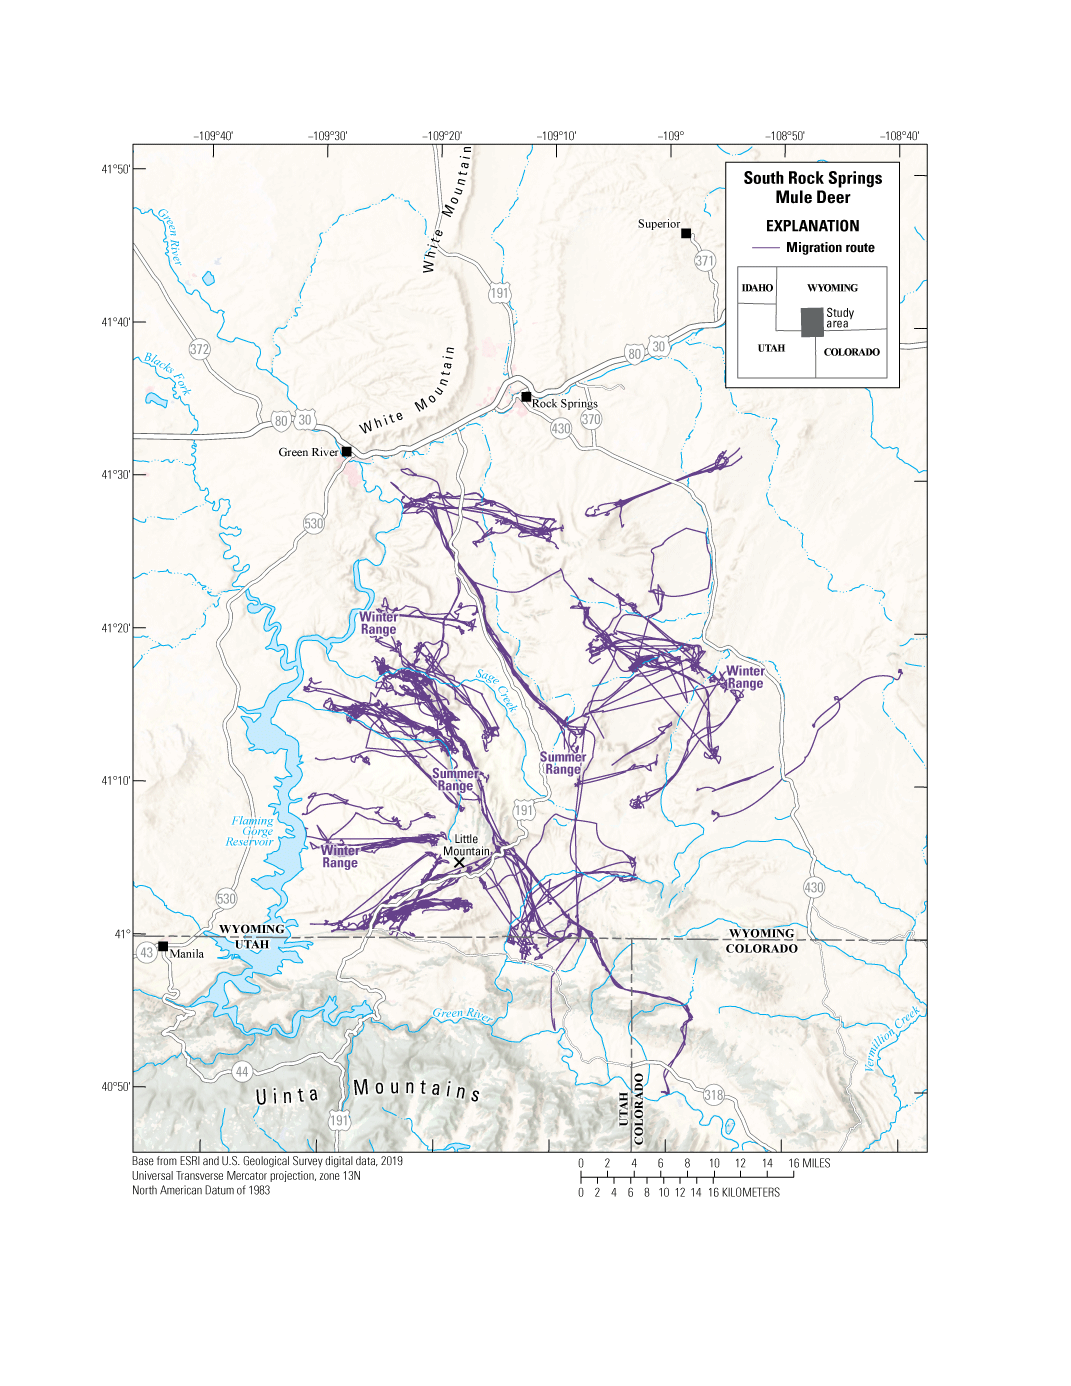 Figure 33. Migration routes of the South Rock Springs.